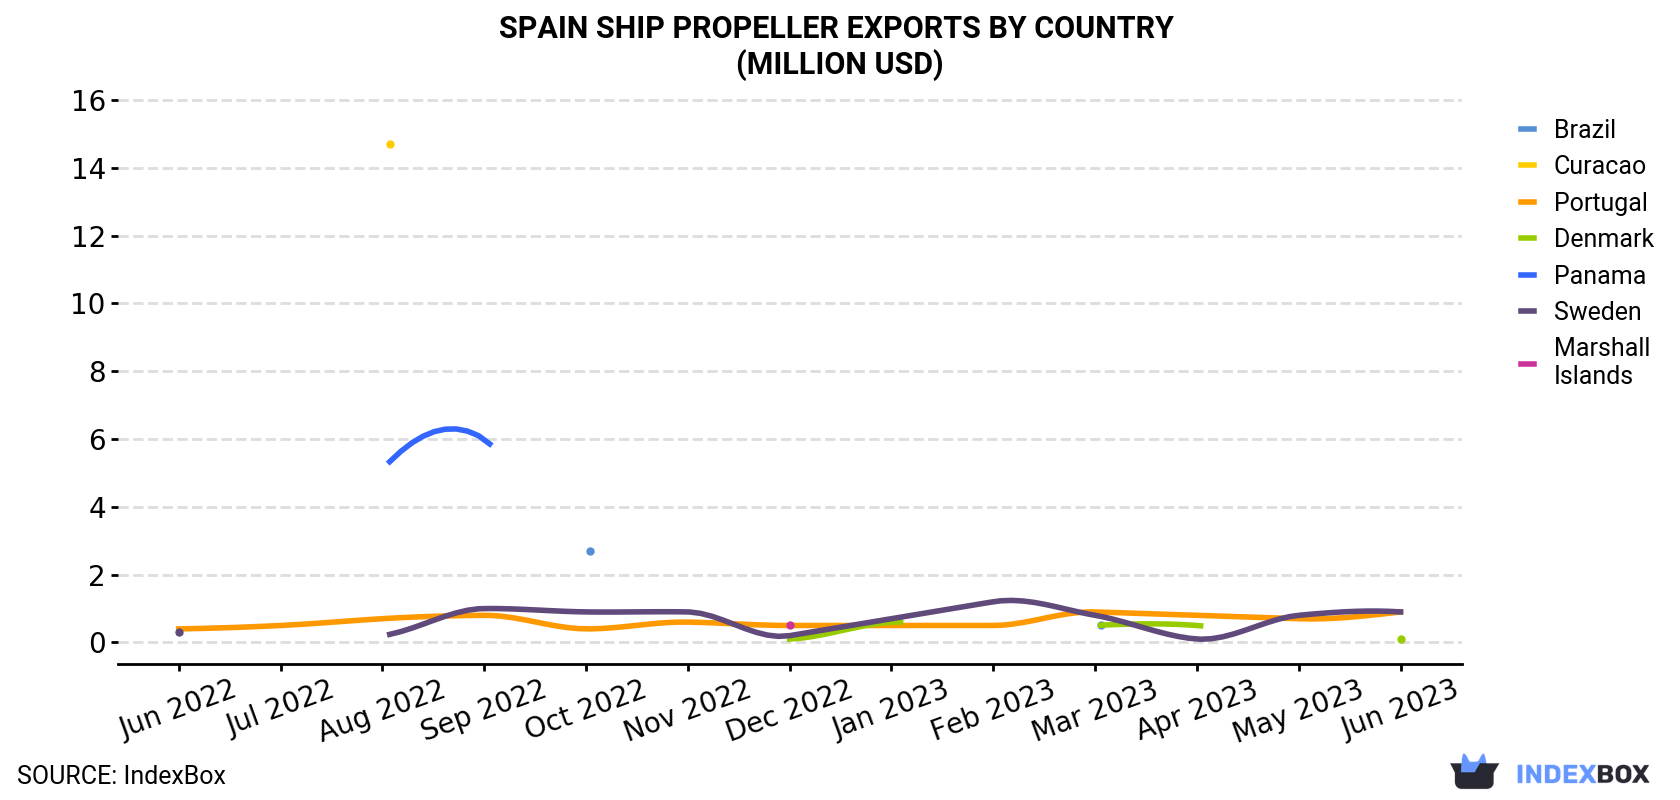 Spain Ship Propeller Exports By Country (Million USD)